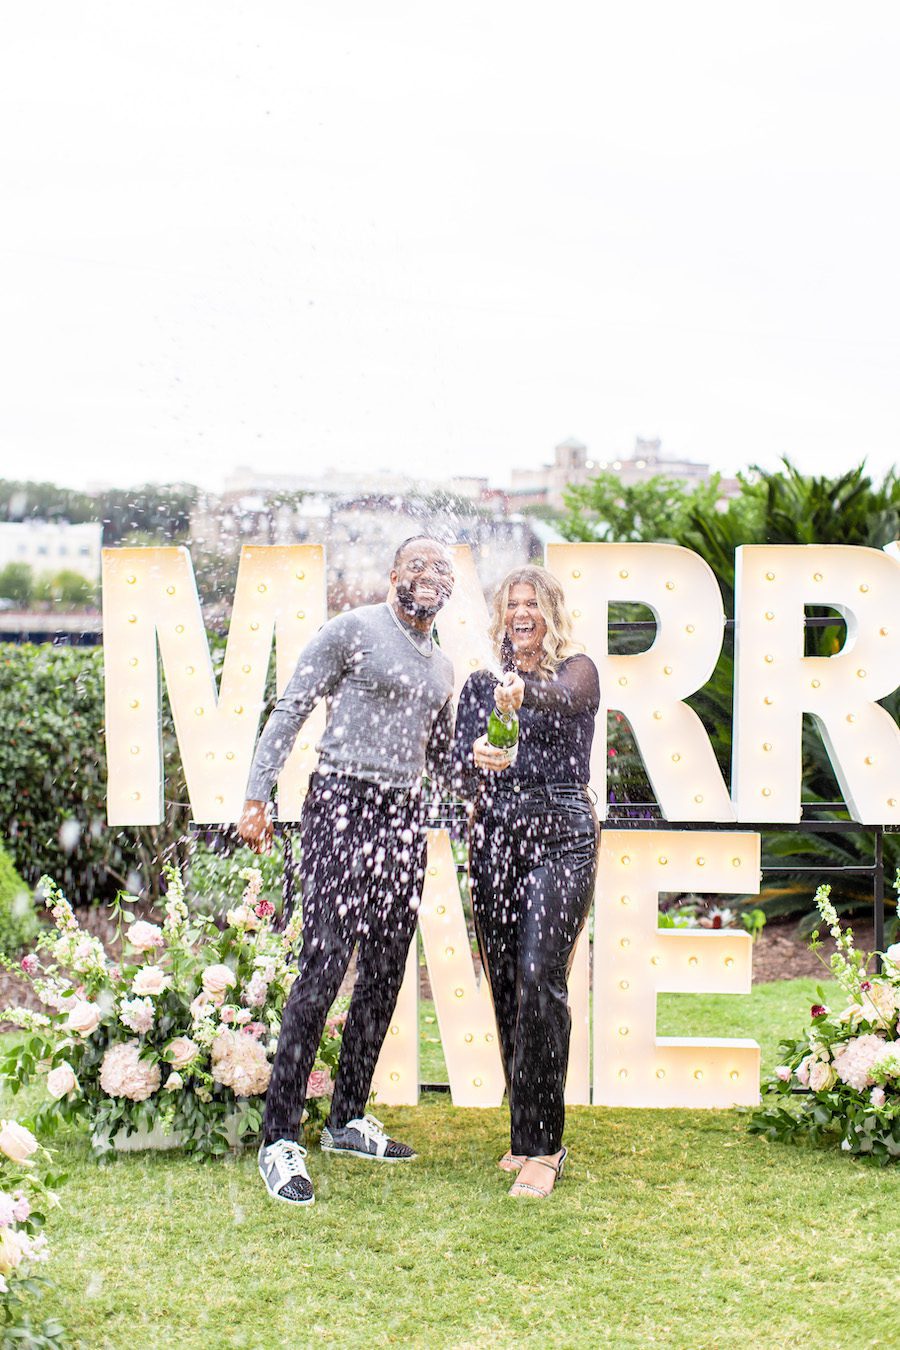 marry me letters and champagne bottle spray